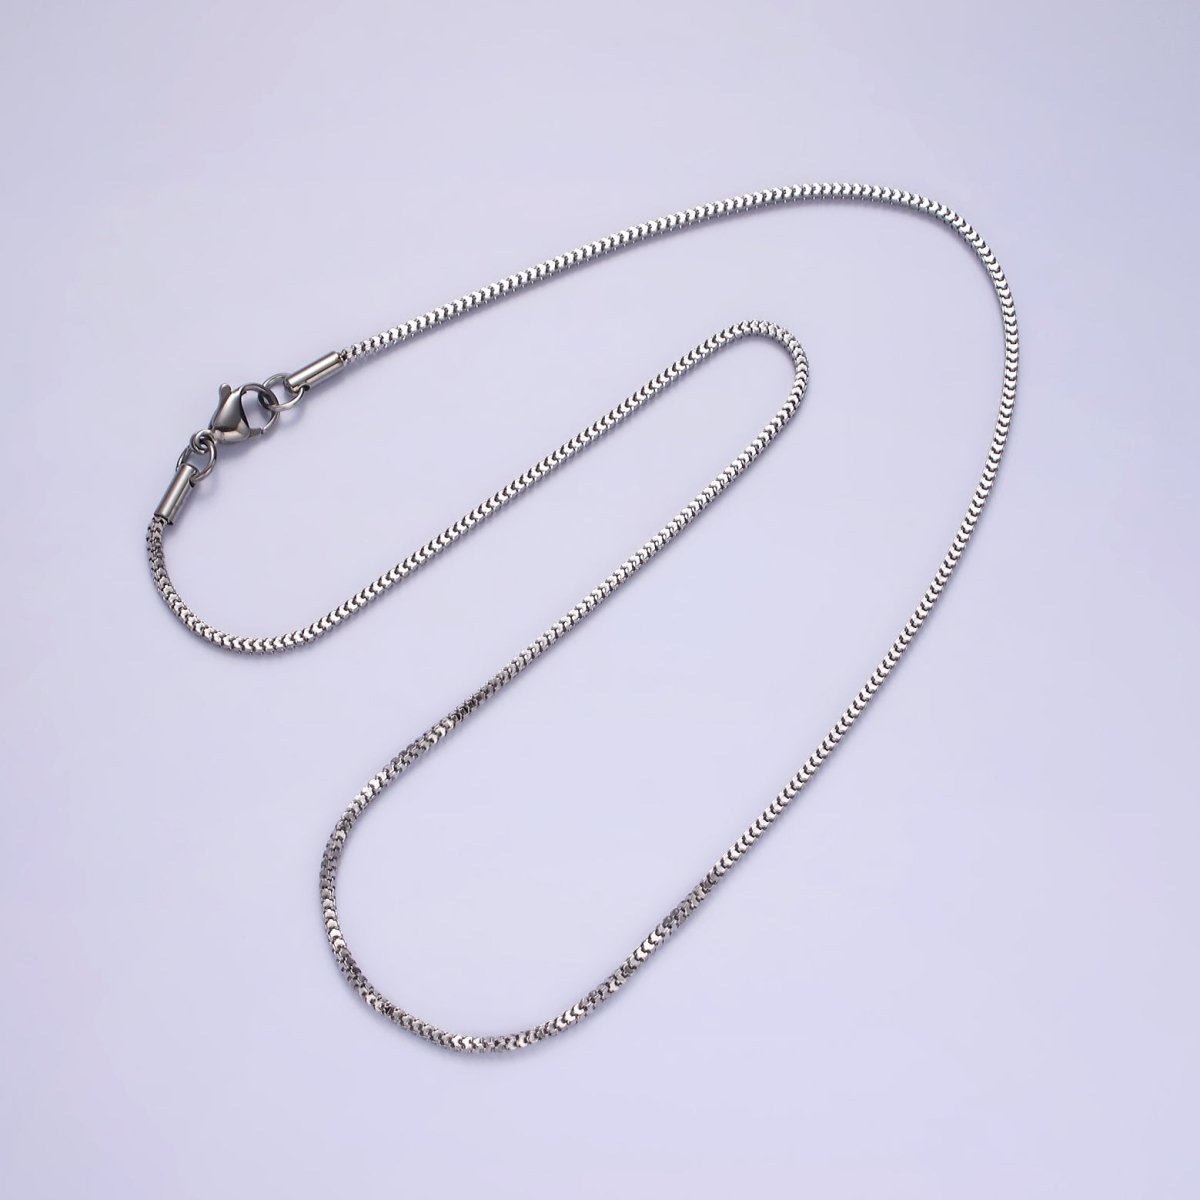 18.5 inch Stainless Steel Herringbone Chain For Wholesale Chains And Jewelry Making Supplies Findings | WA-2113 Clearance Pricing - DLUXCA